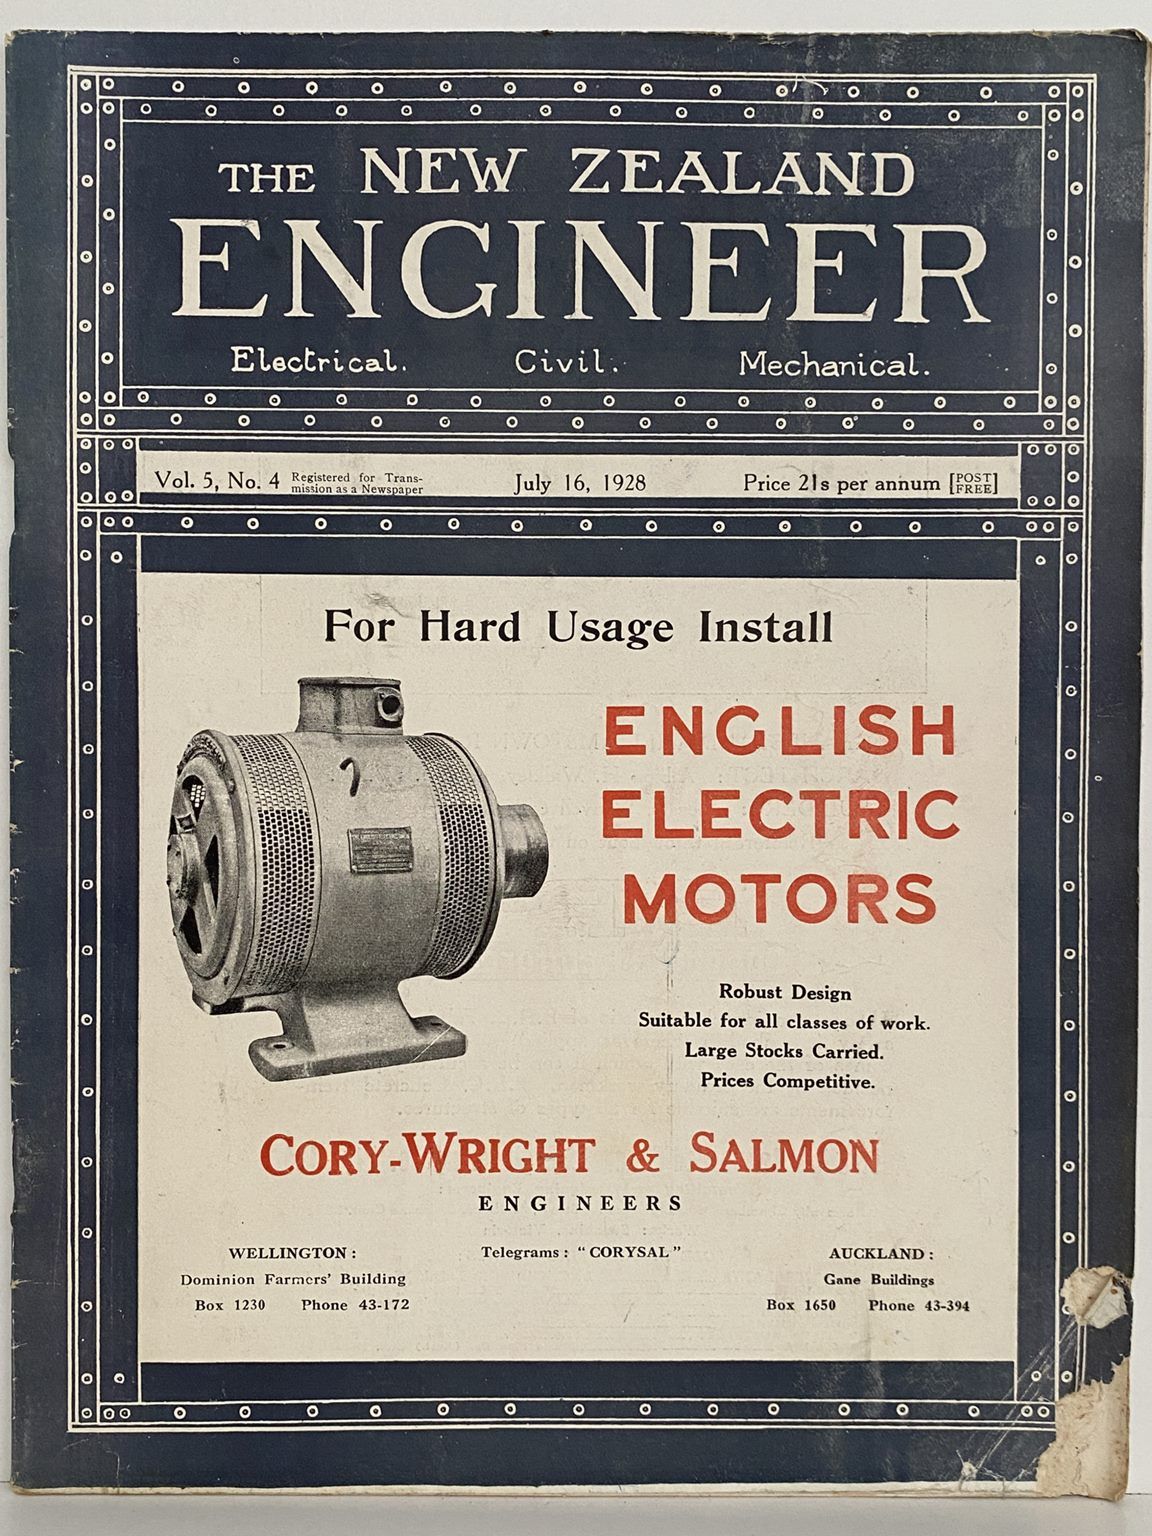 OLD MAGAZINE: The New Zealand Engineer Vol. 5, No. 4 - 16 July 1928